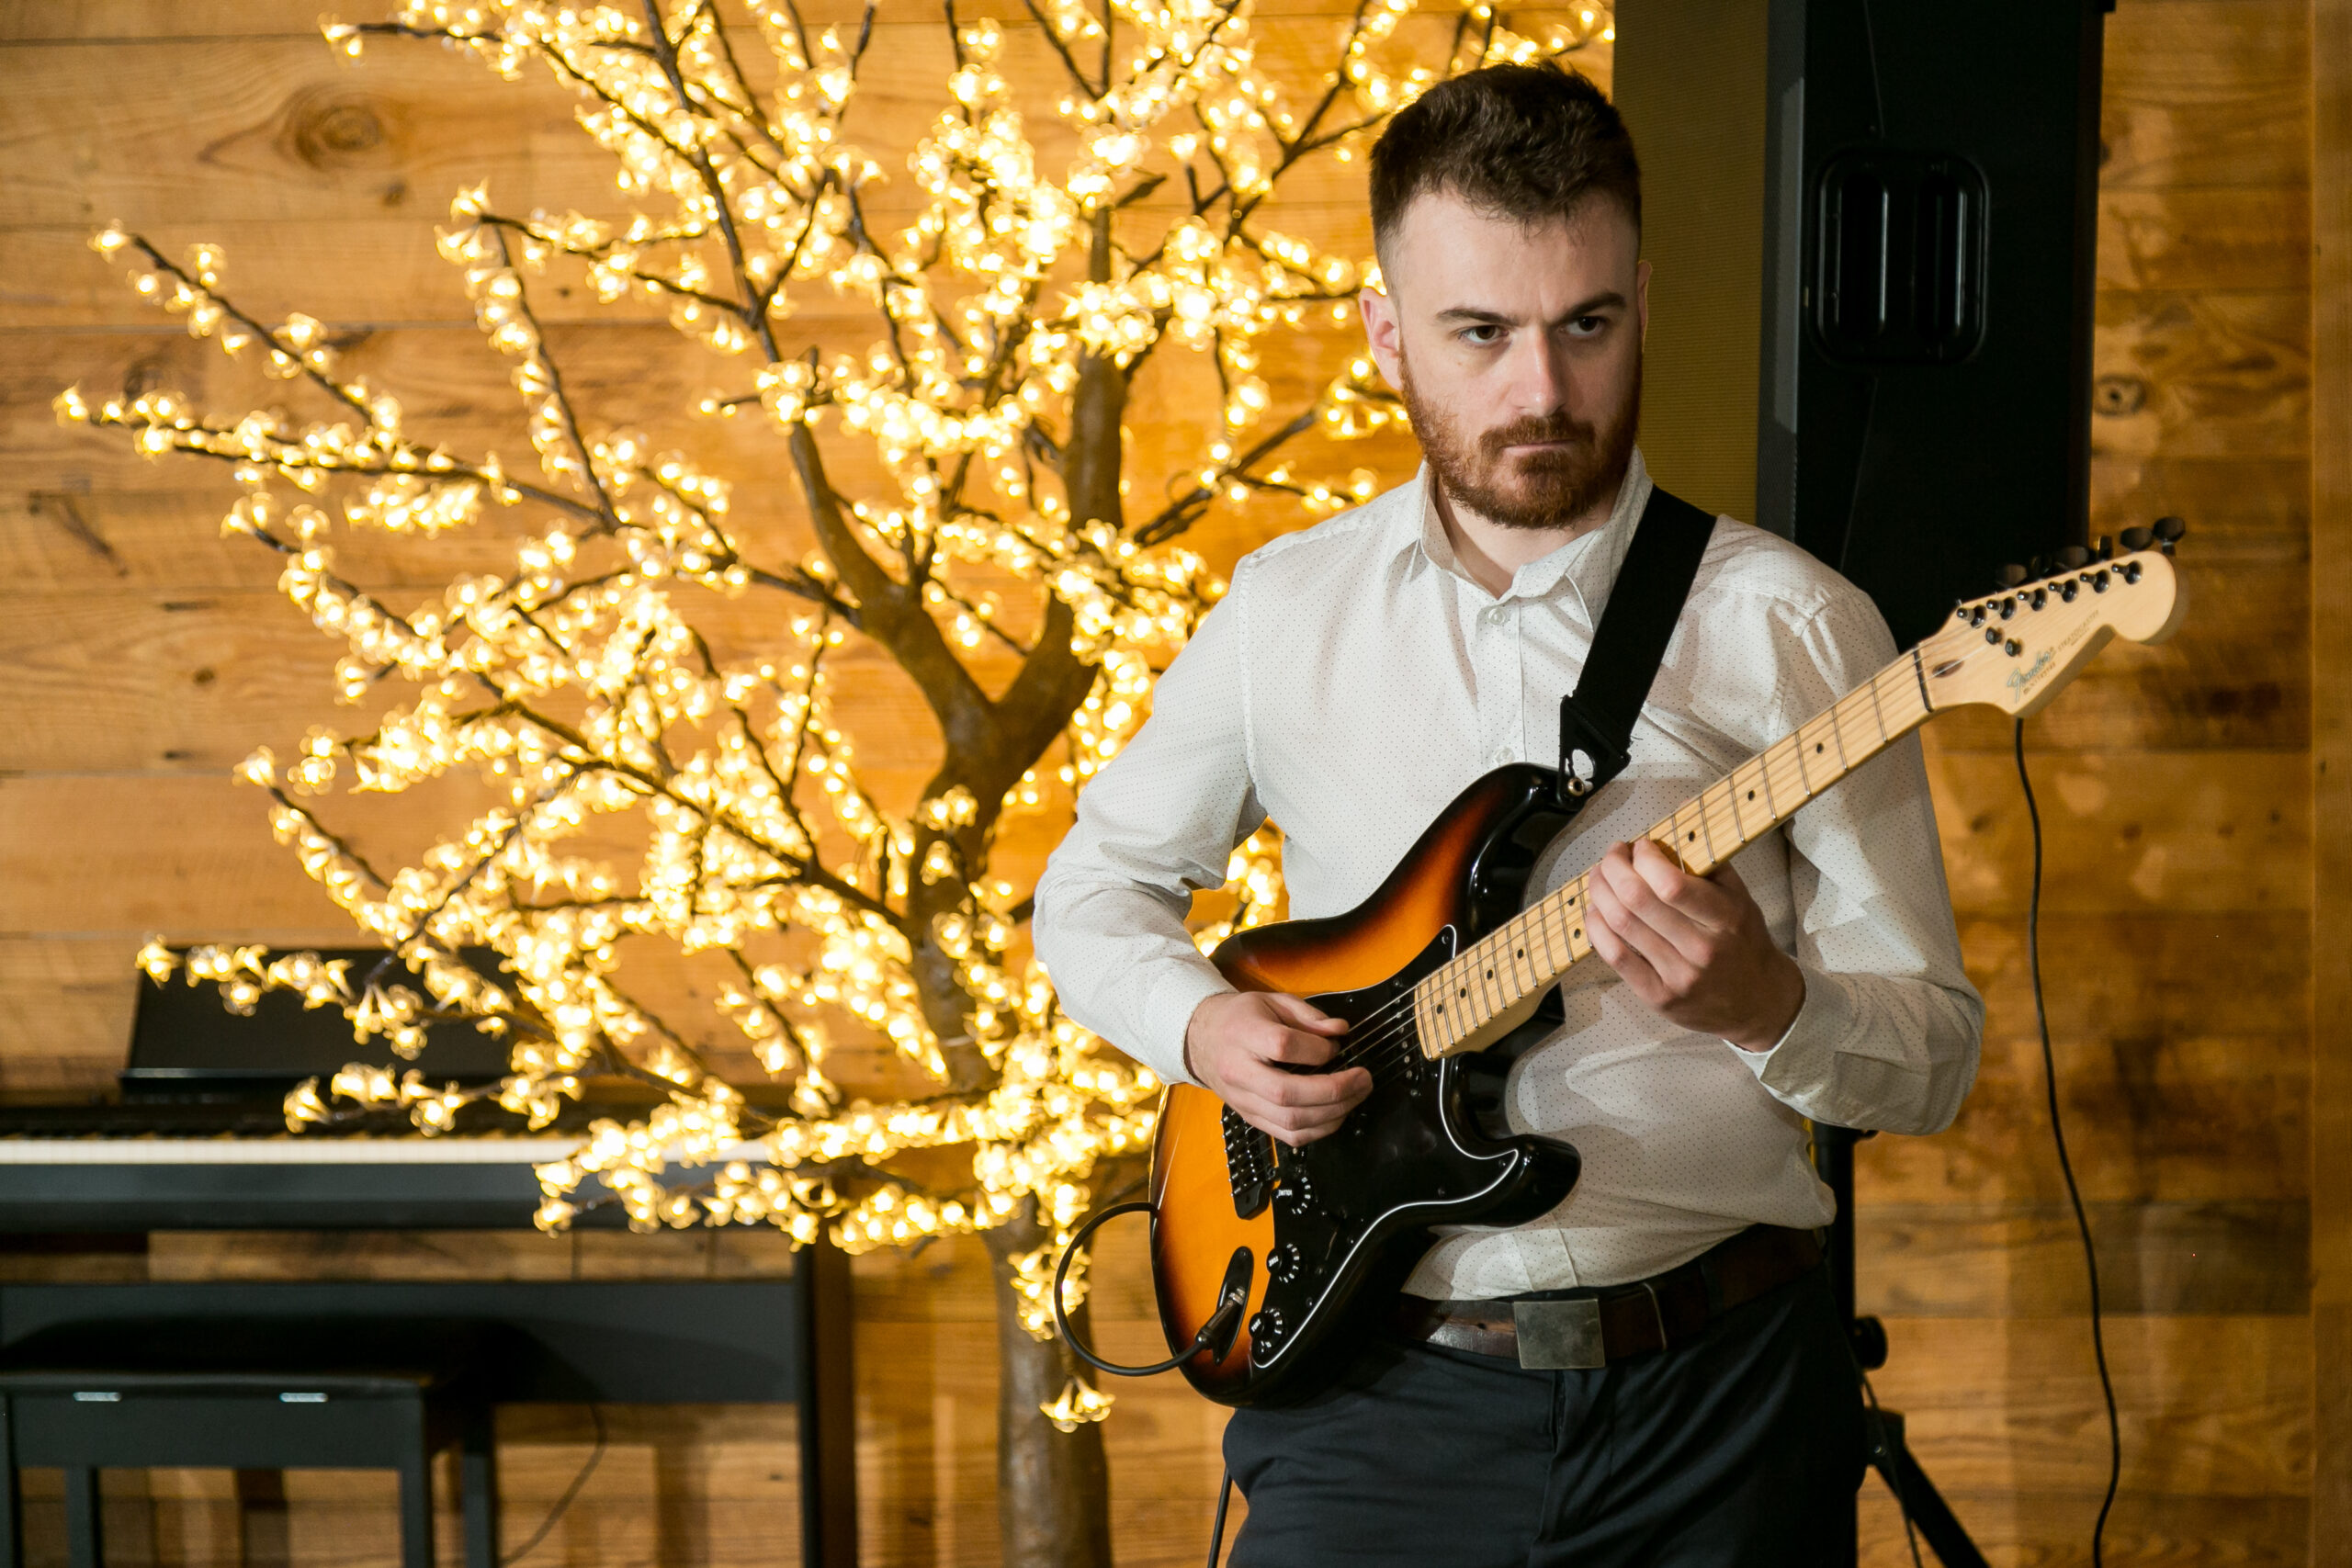 A man plays an electric guitar while standing in from of a light up tree.